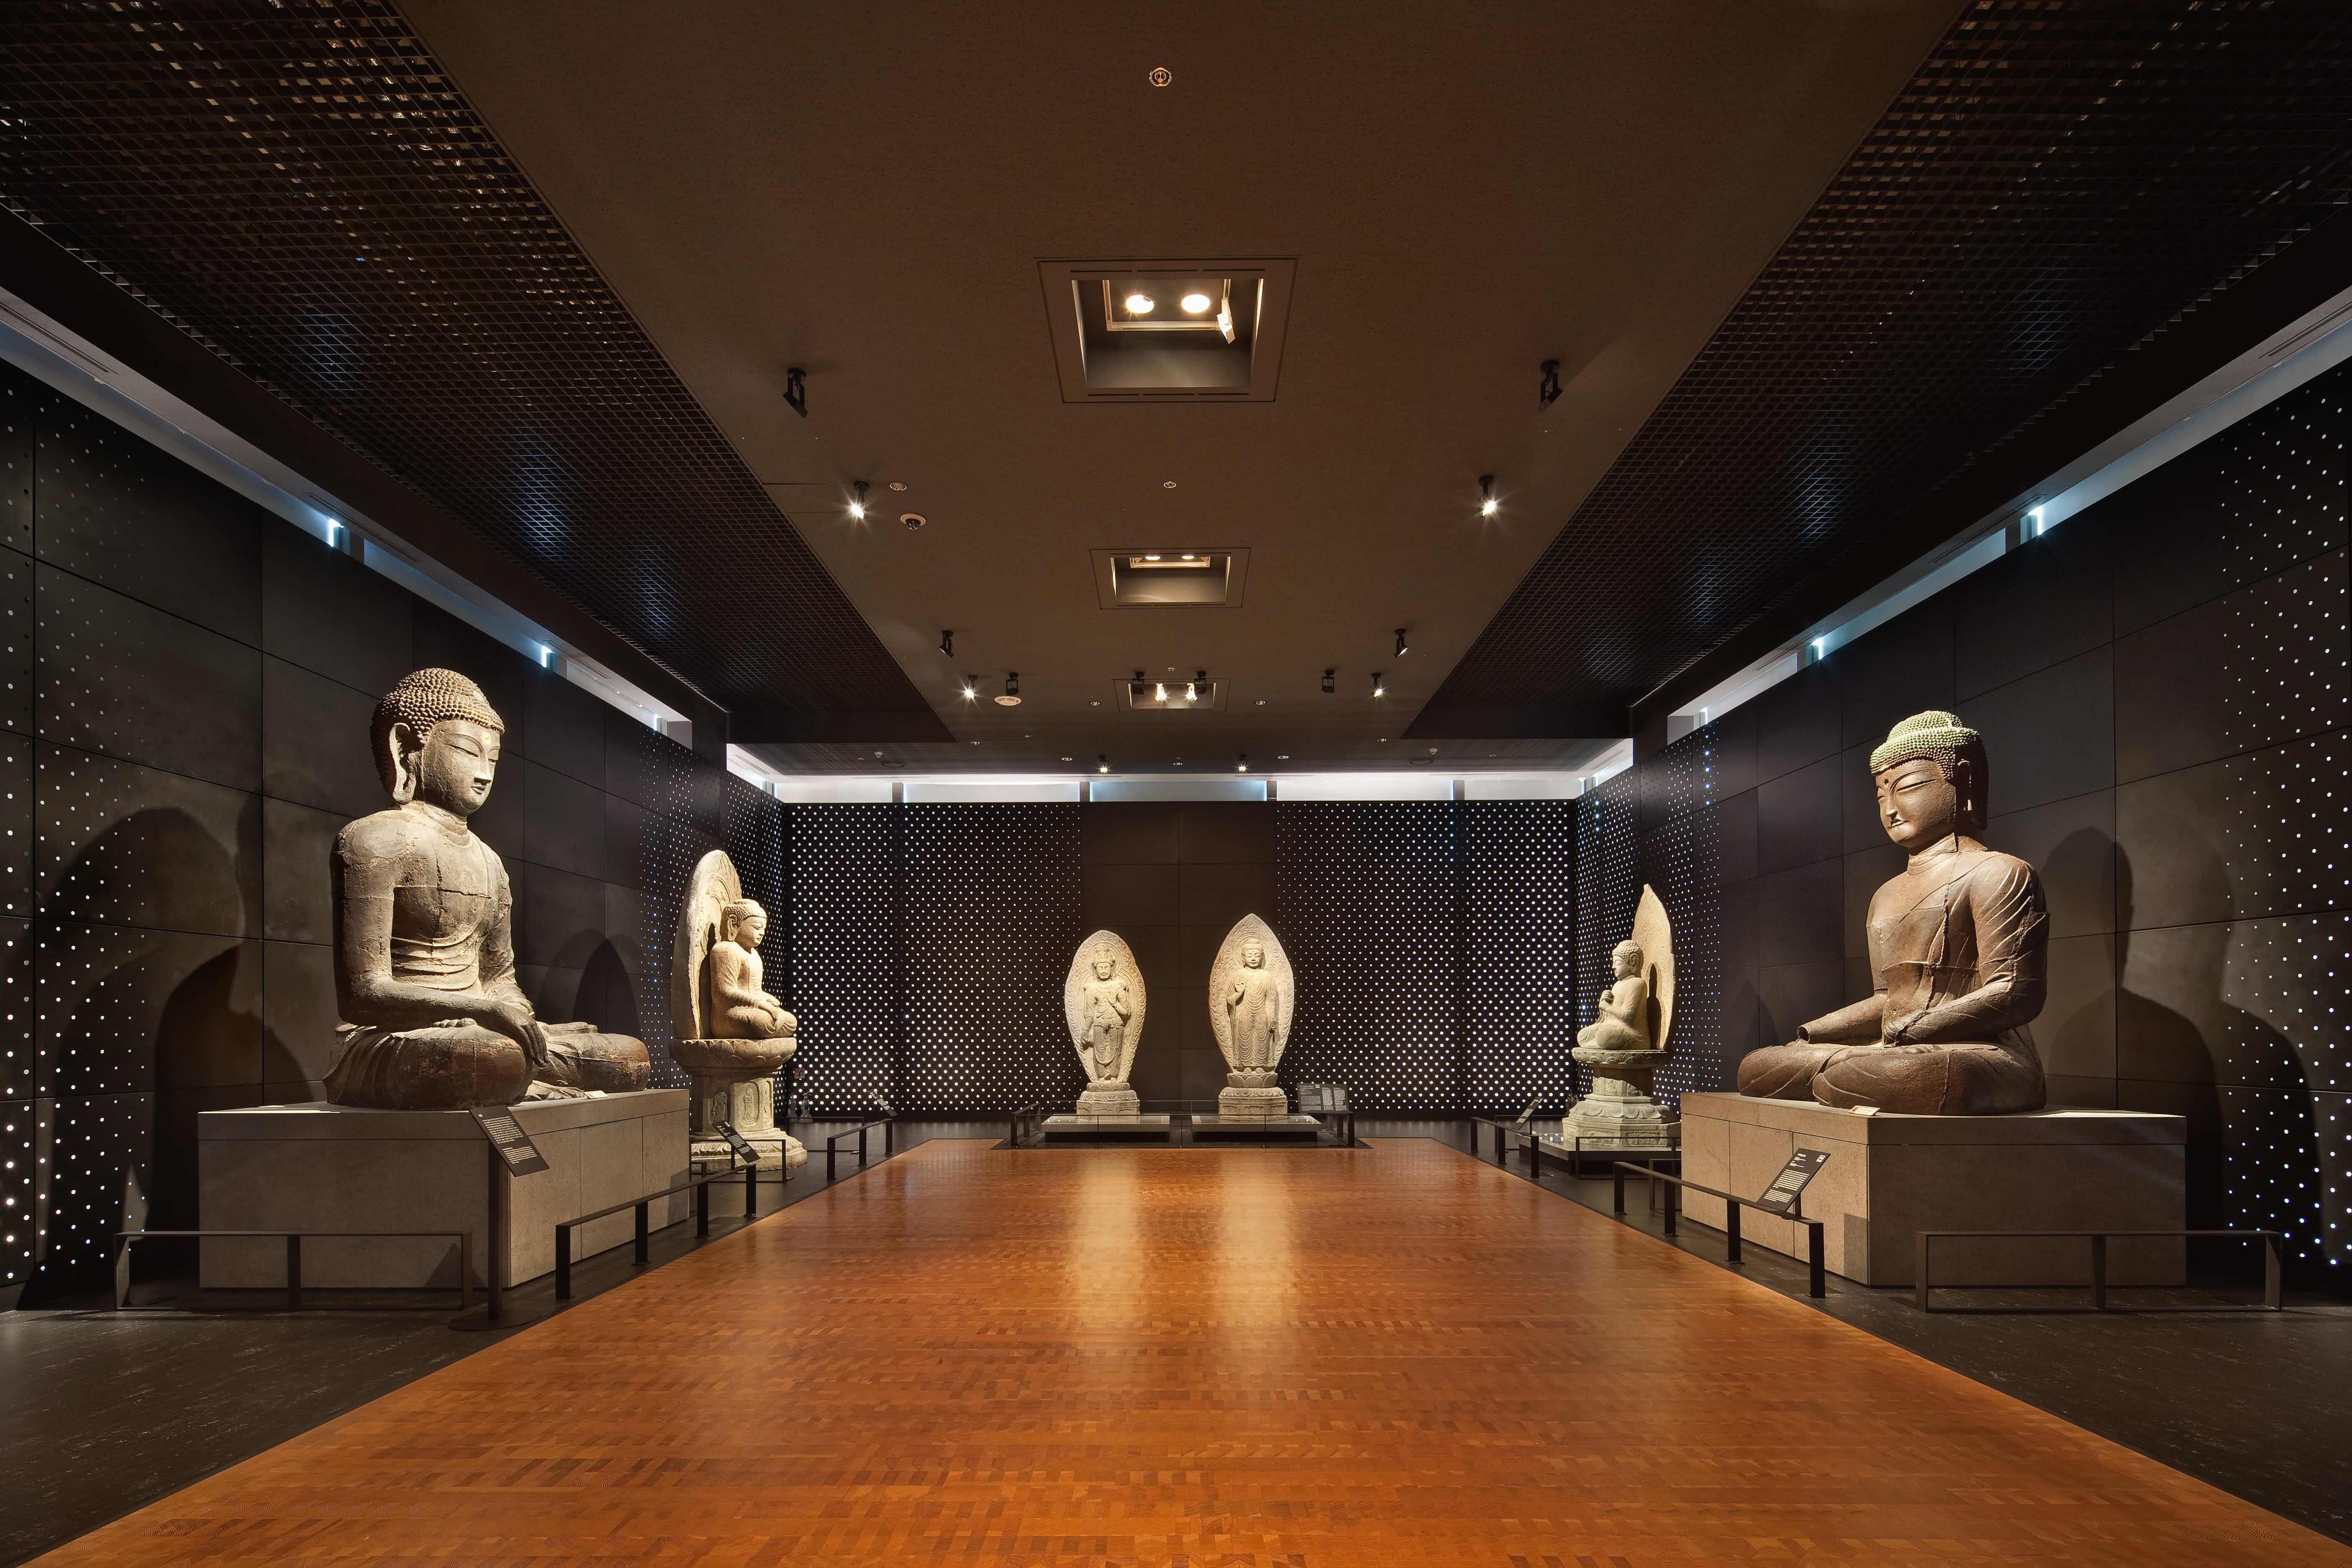 National Museum of Korea0 : A view of Buddhist relics in the exhibition room of the National Museum of Korea